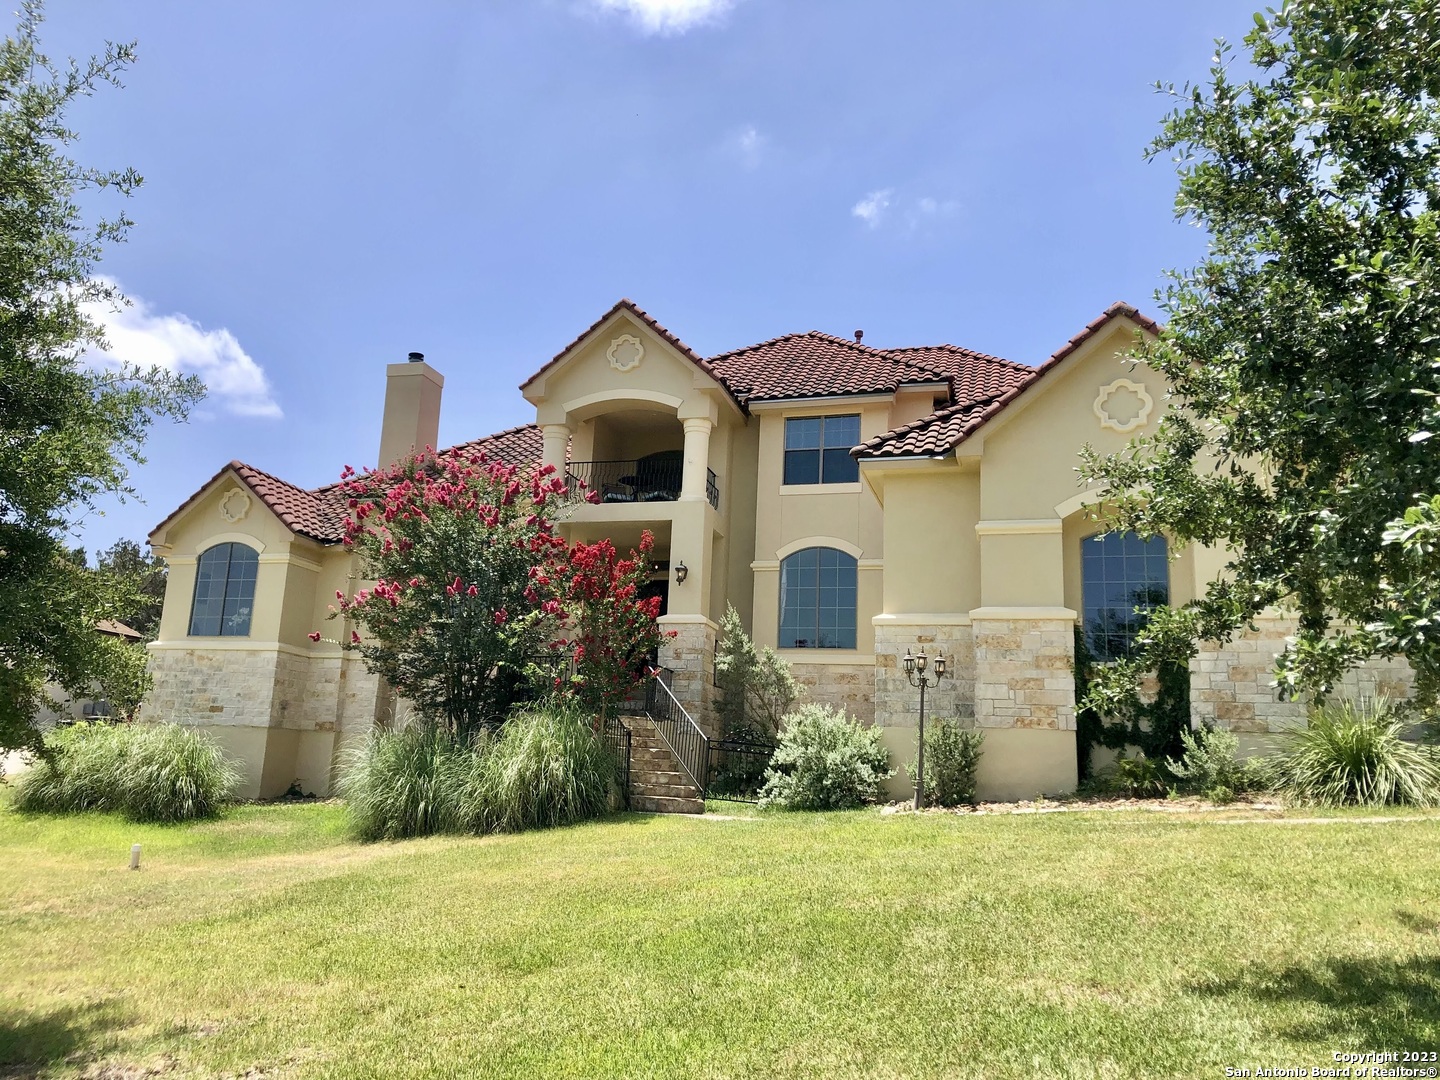 Located in the highly desirable city of Garden Ridge within the quiet gated community of Georg Ranch, this custom-built 4-bed, 3.5-bath, oversized 3-car garage is one you'll not want to miss. In a great location this house in the hill country is near schools, shopping, entertainment, and more. Upon entering this home, you will be greeted with gorgeous soaring ceilings and elegant architectural designs with a beautiful gas/wood fireplace highlighting the formal living room. The main level includes an office, flex room, gourmet kitchen, and multiple open spacious living areas. Also located on the main floor the large master retreat has a spa-like en suite and his and her walk in closets. This home boasts beautiful arches from room to room and stunning tray ceilings throughout which are highlighted by crown molding. The second floor offers 3 more bedrooms, two bathrooms and a balcony perfect for watching the sunrise. The spacious backyard is perfect for entertaining and has plenty of space to add in a pool.